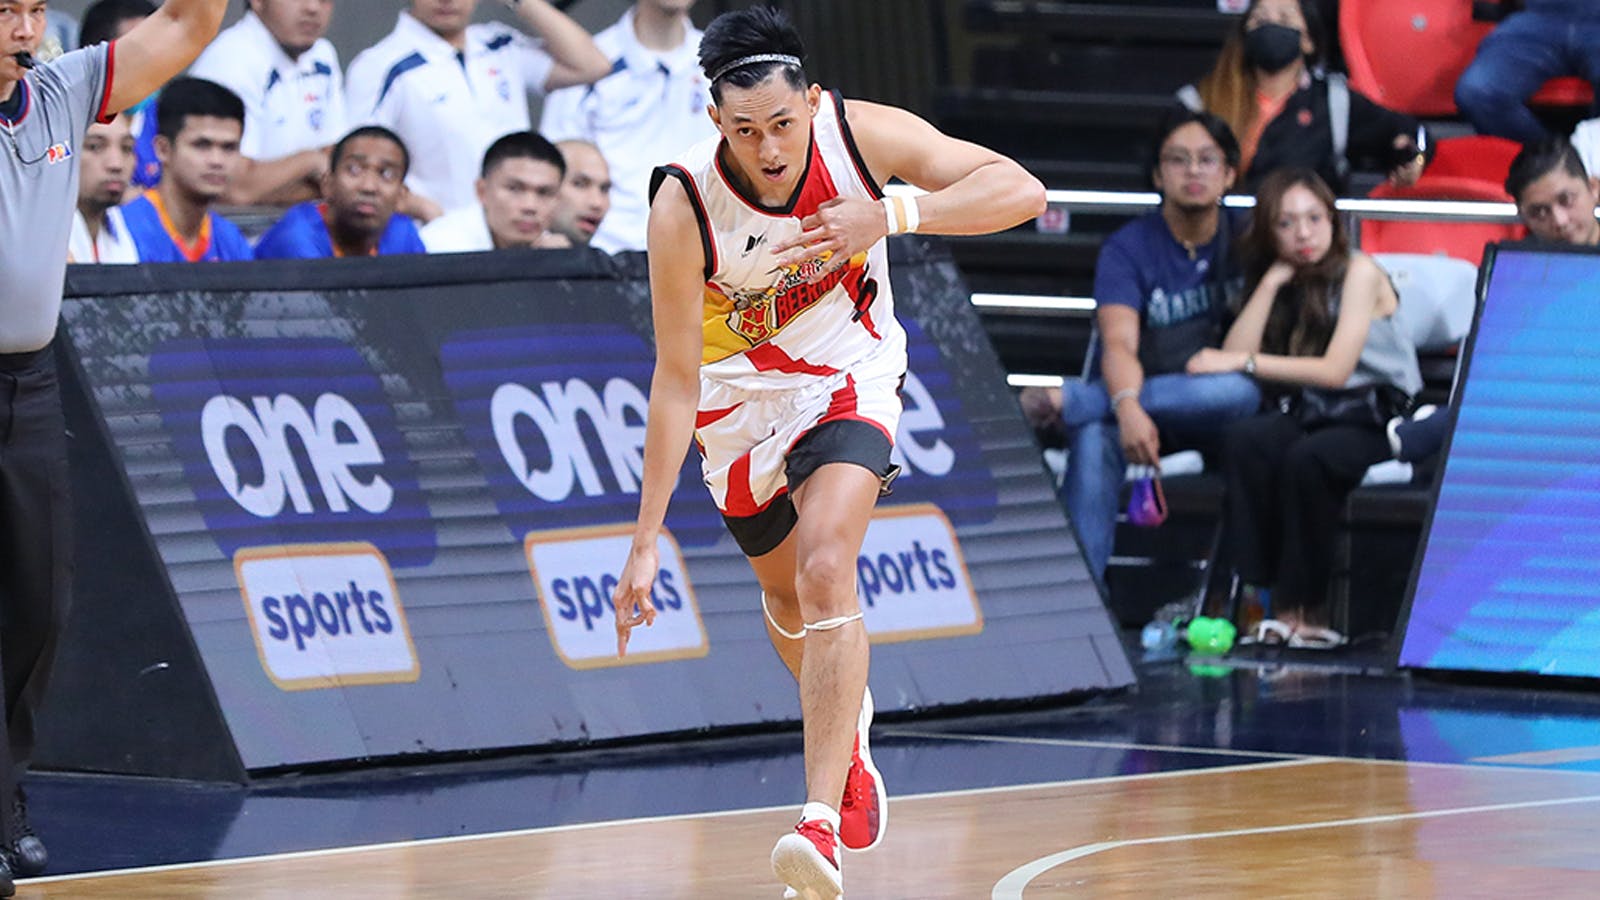 San Miguel out to prove they can win title sans June Mar Fajardo: What to expect